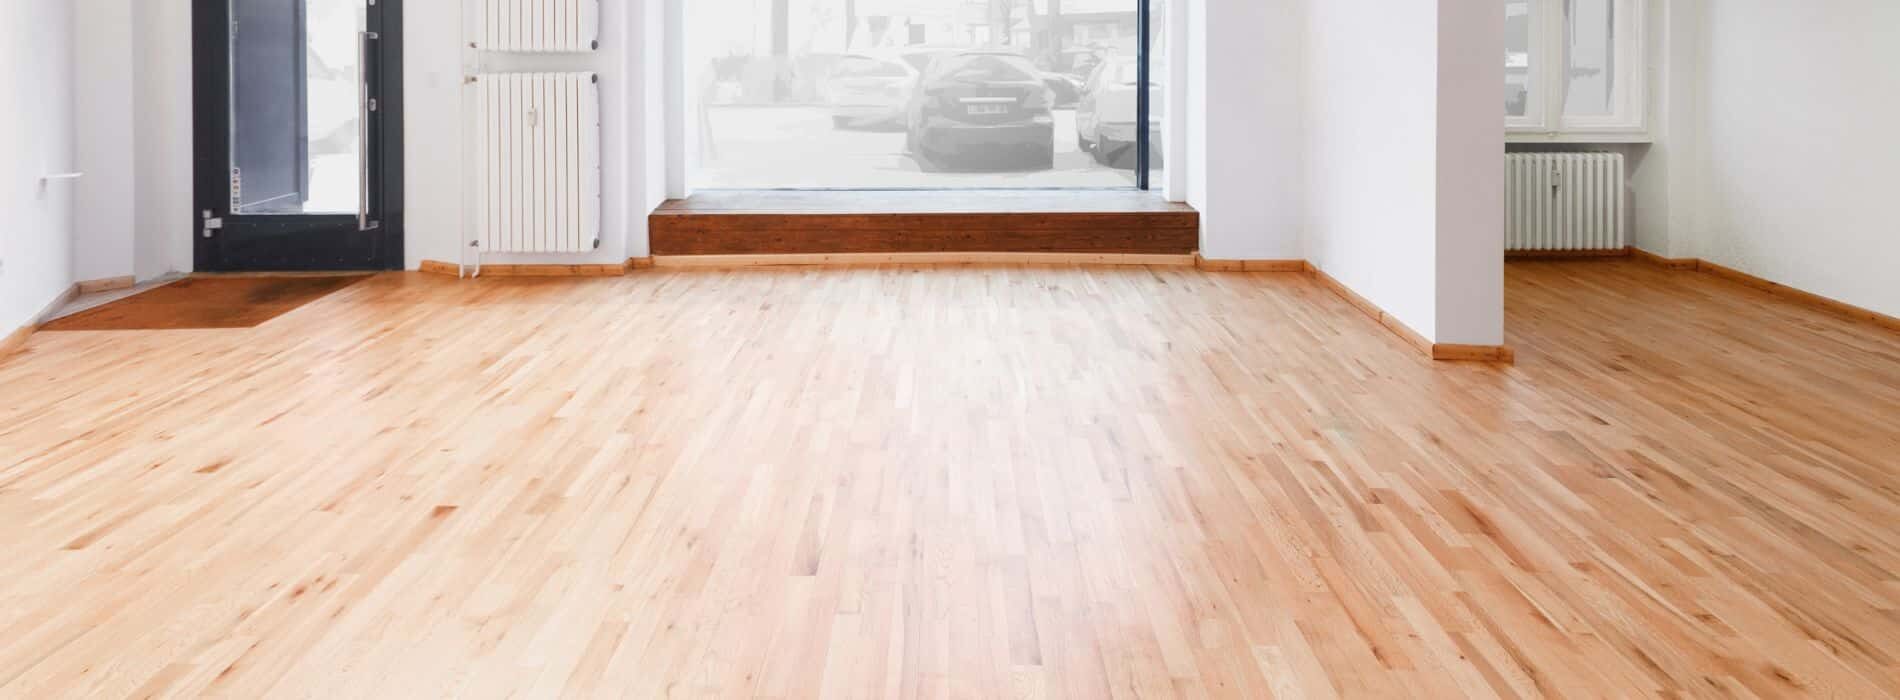 Impeccably renewed, a 5-year-old hardwood floor in Tooting, SW17 shines after expert restoration. Mr Sander® utilized Bona 2K Frost whitewashing and Traffic HD 15% sheen matte lacquer, creating a durable and breathtaking finish.